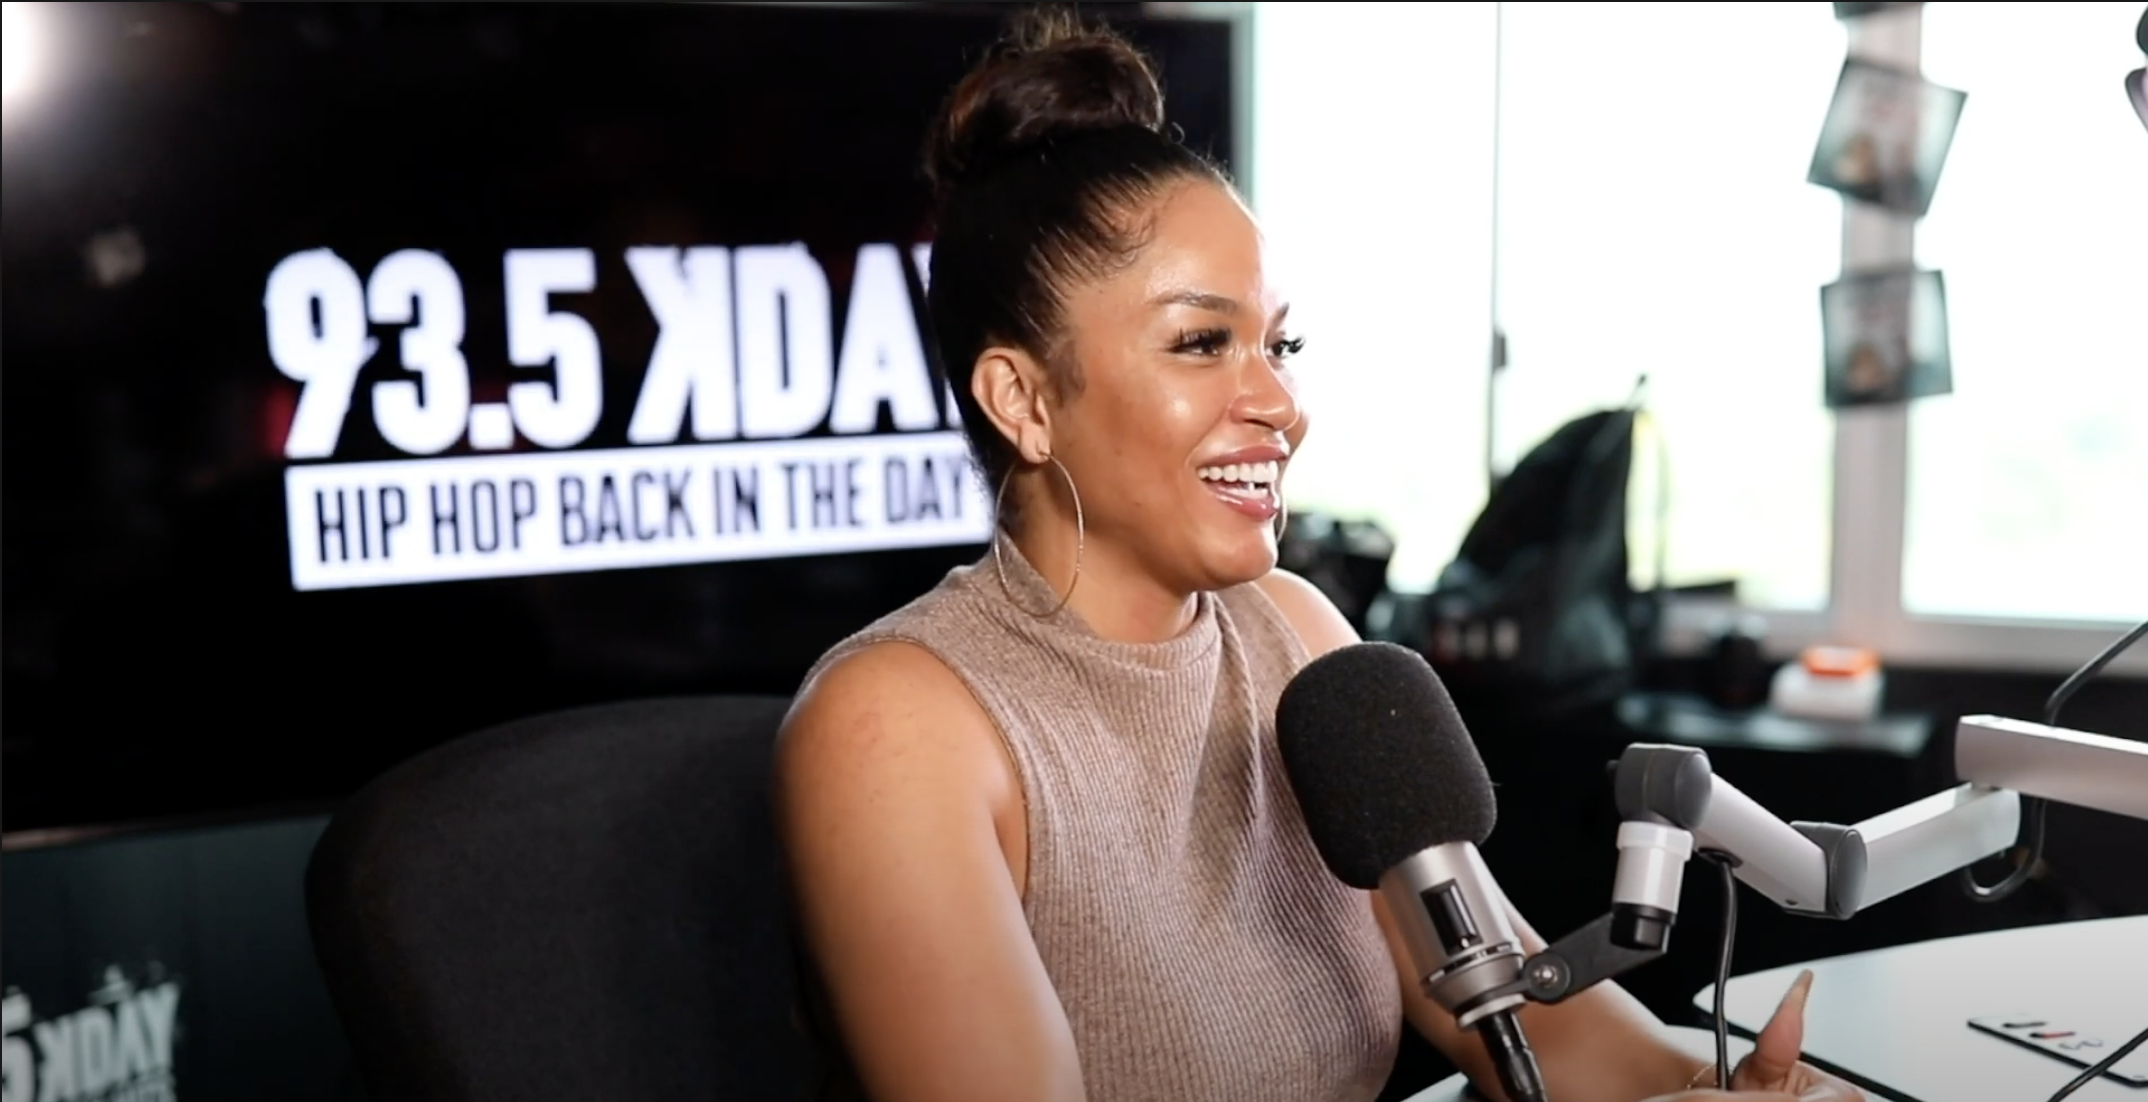 Rosa Acosta Details Role On Bounce TV’s “Johnson” + How She Connected With Nick Cannon On ‘She Ball’